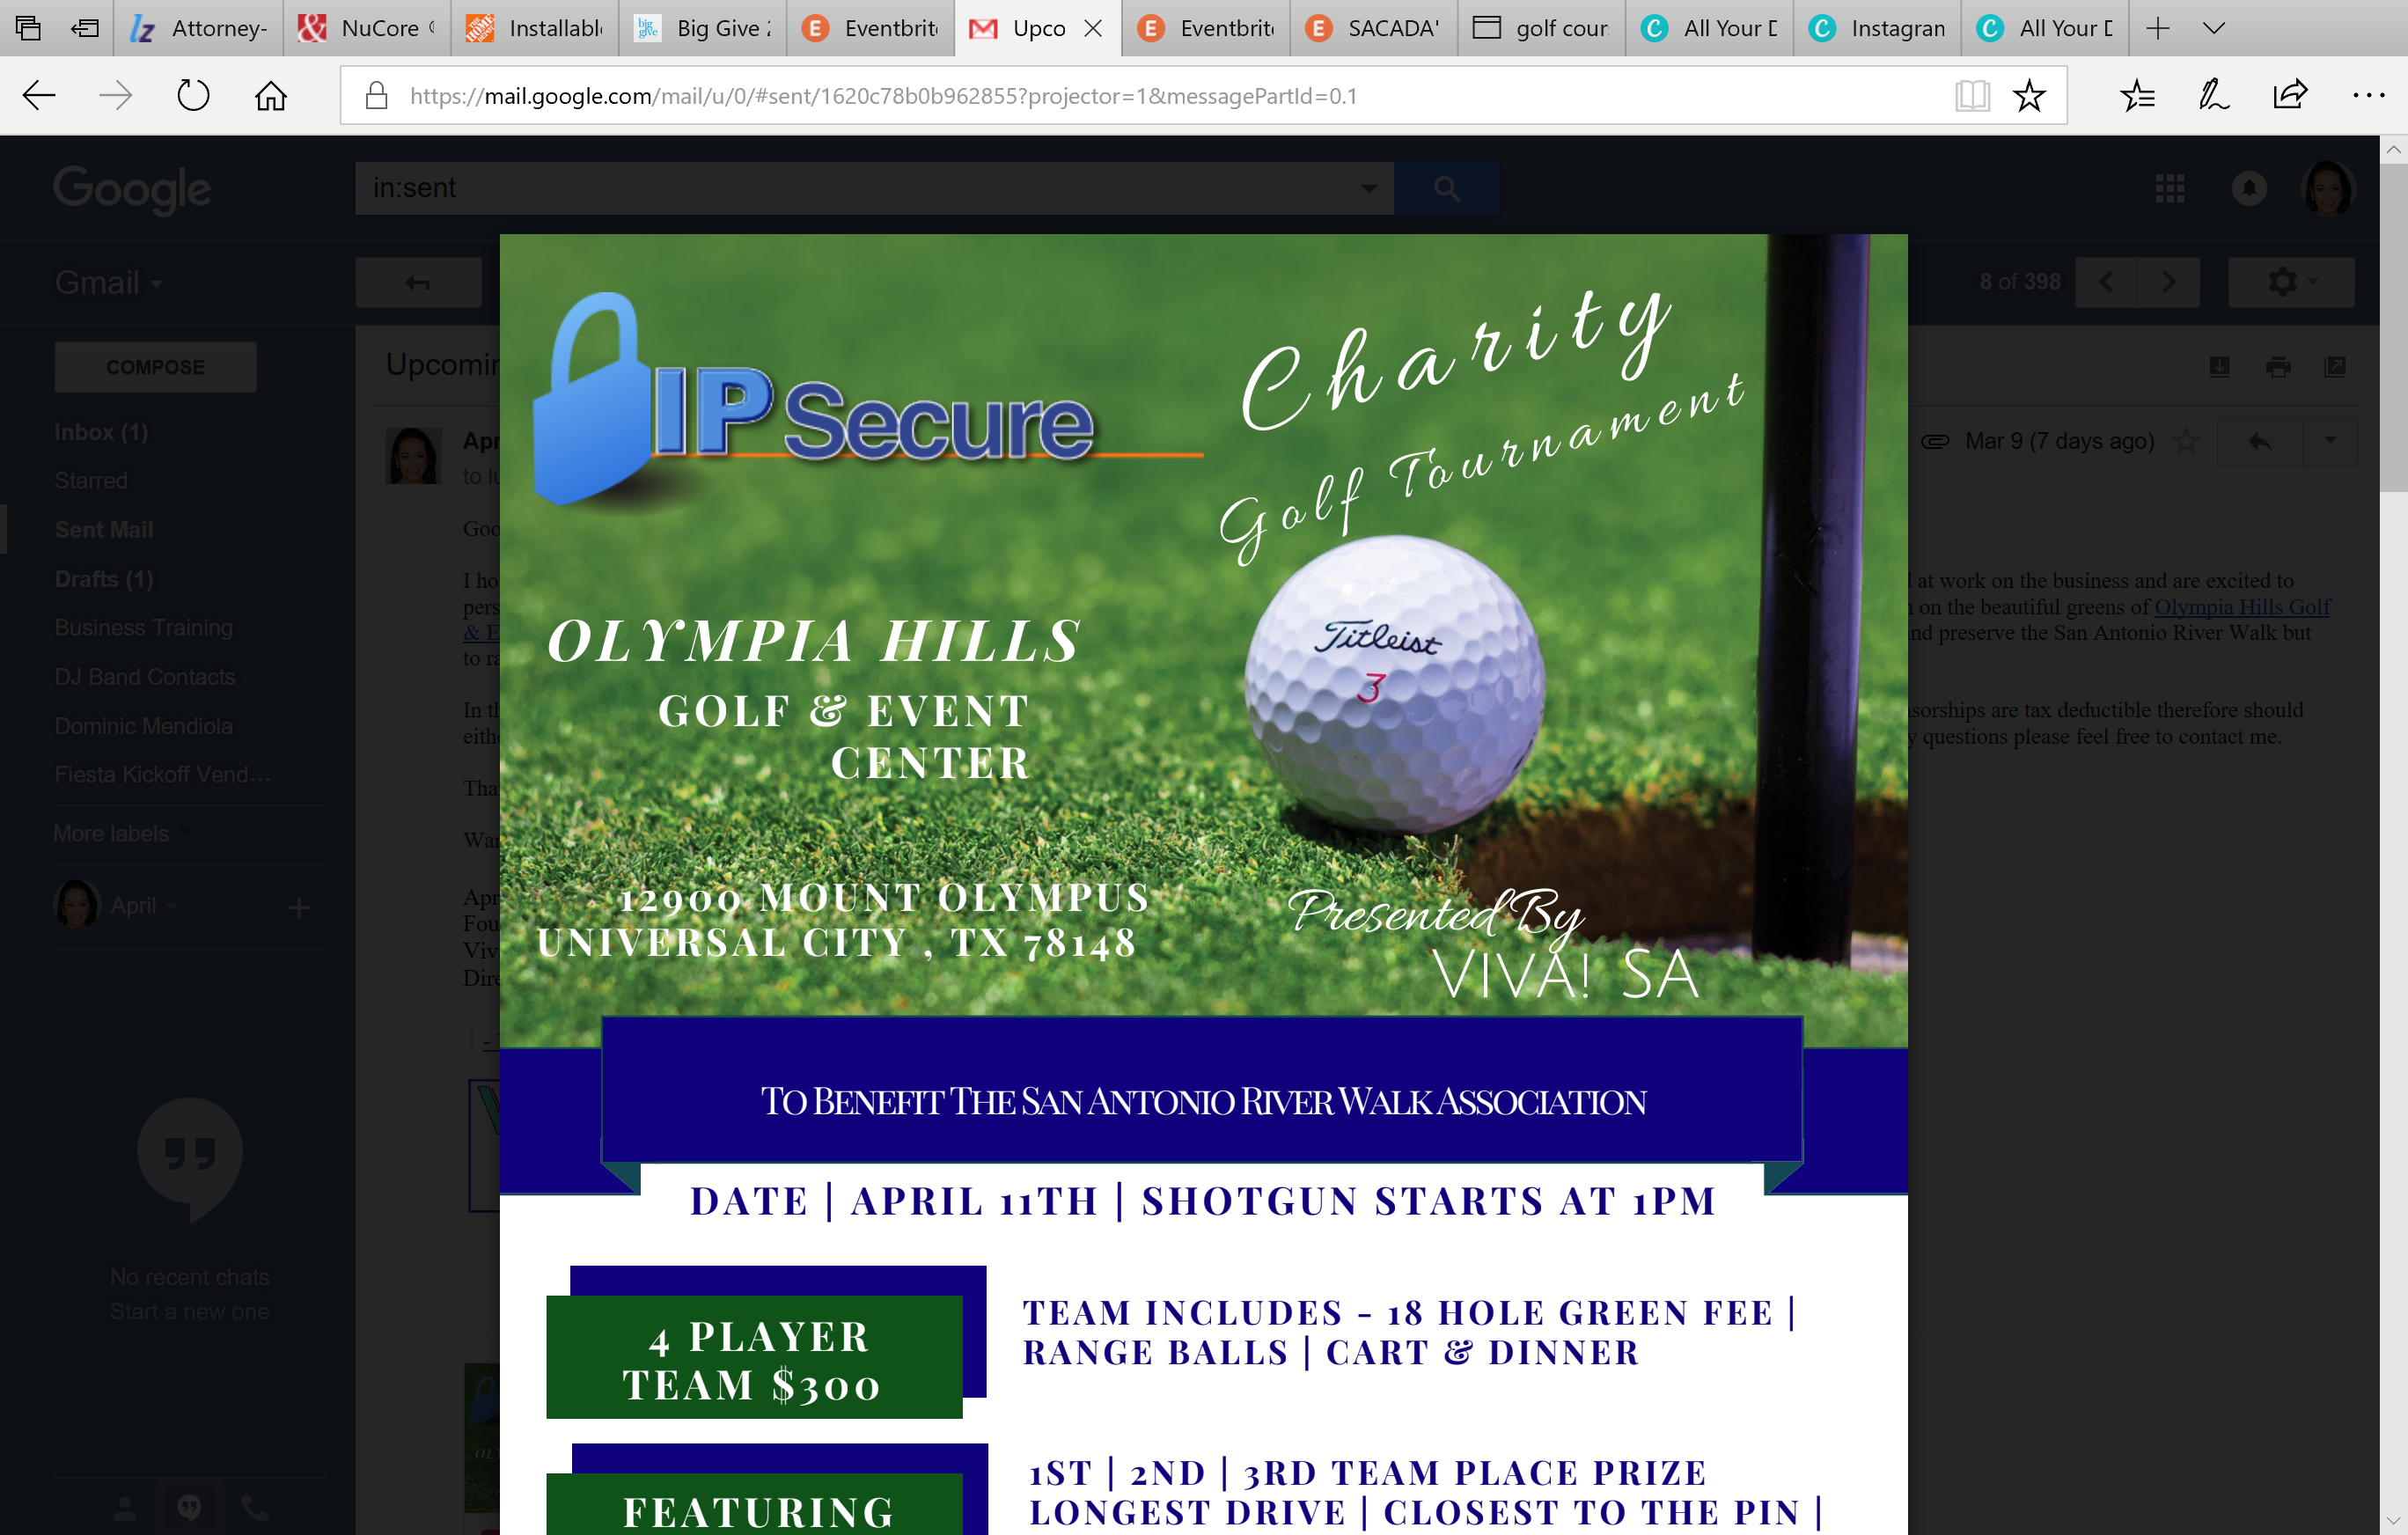 IP Secure Charity Golf Tournament